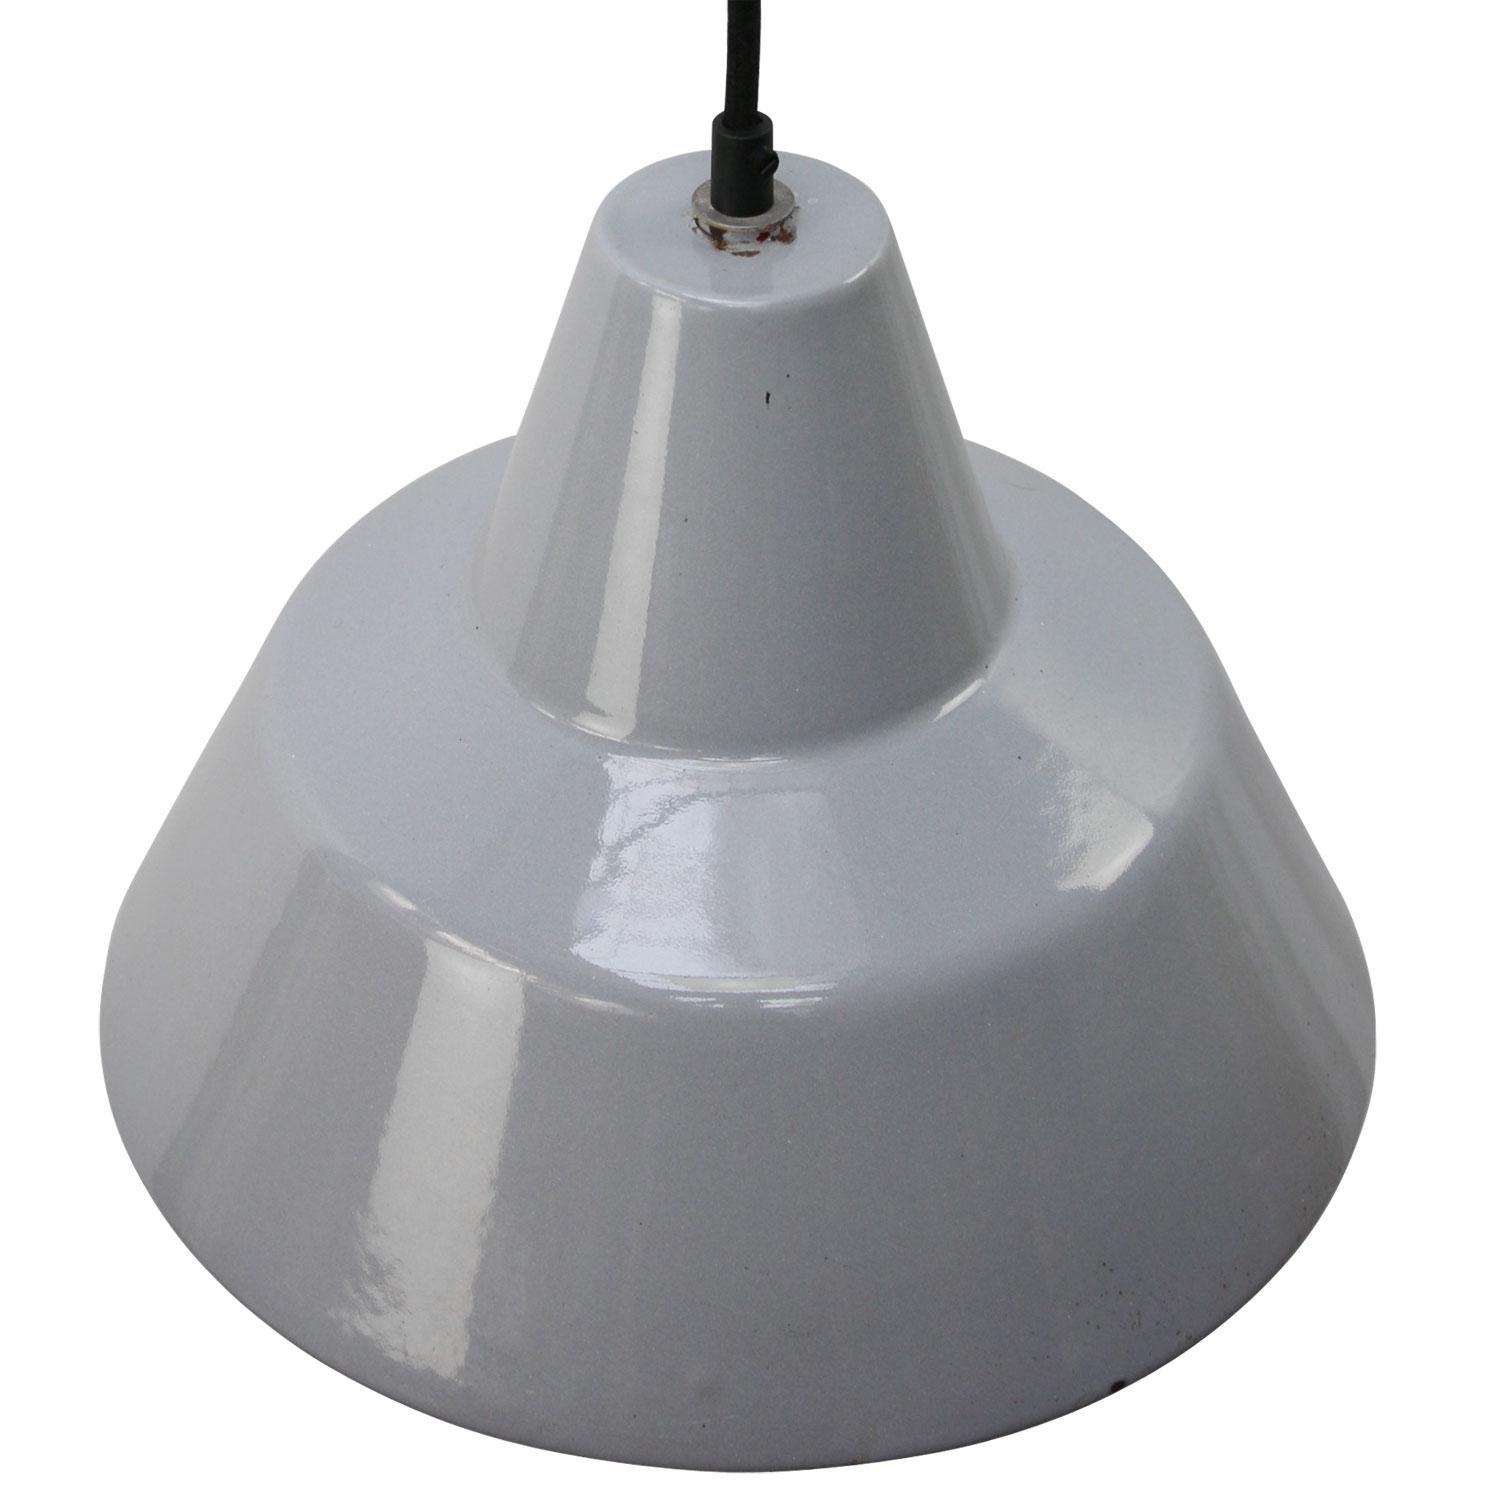 Industrial hanging lamp made by Philips, Holland.
Gray enamel white interior.

Weight: 0.80 kg / 1.8 lb

Priced per individual item. All lamps have been made suitable by international standards for incandescent light bulbs, energy-efficient and